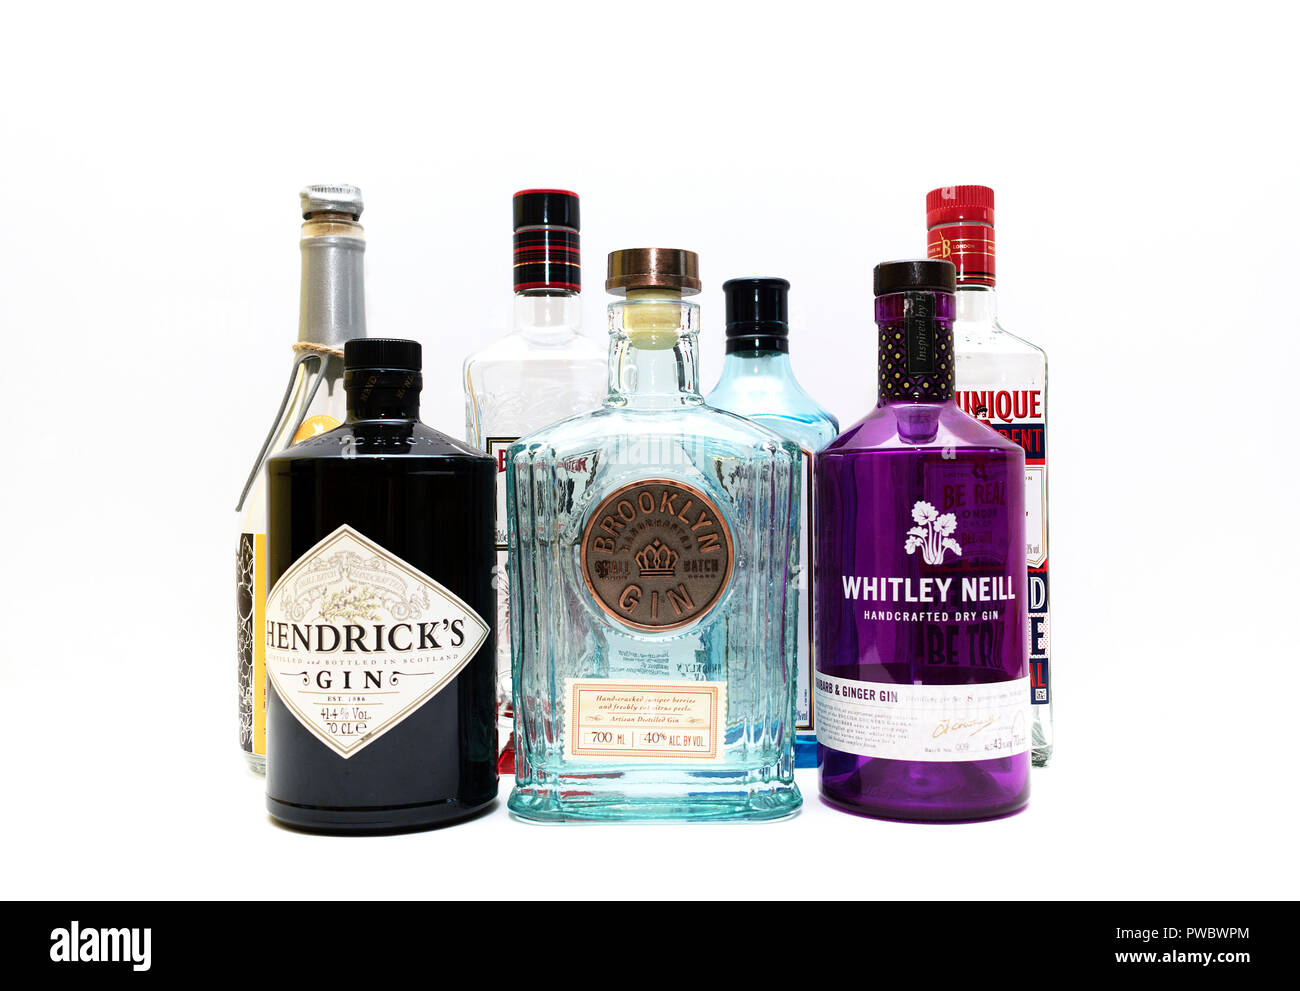 bottles of craft gins, speciality gin, Stock Photo